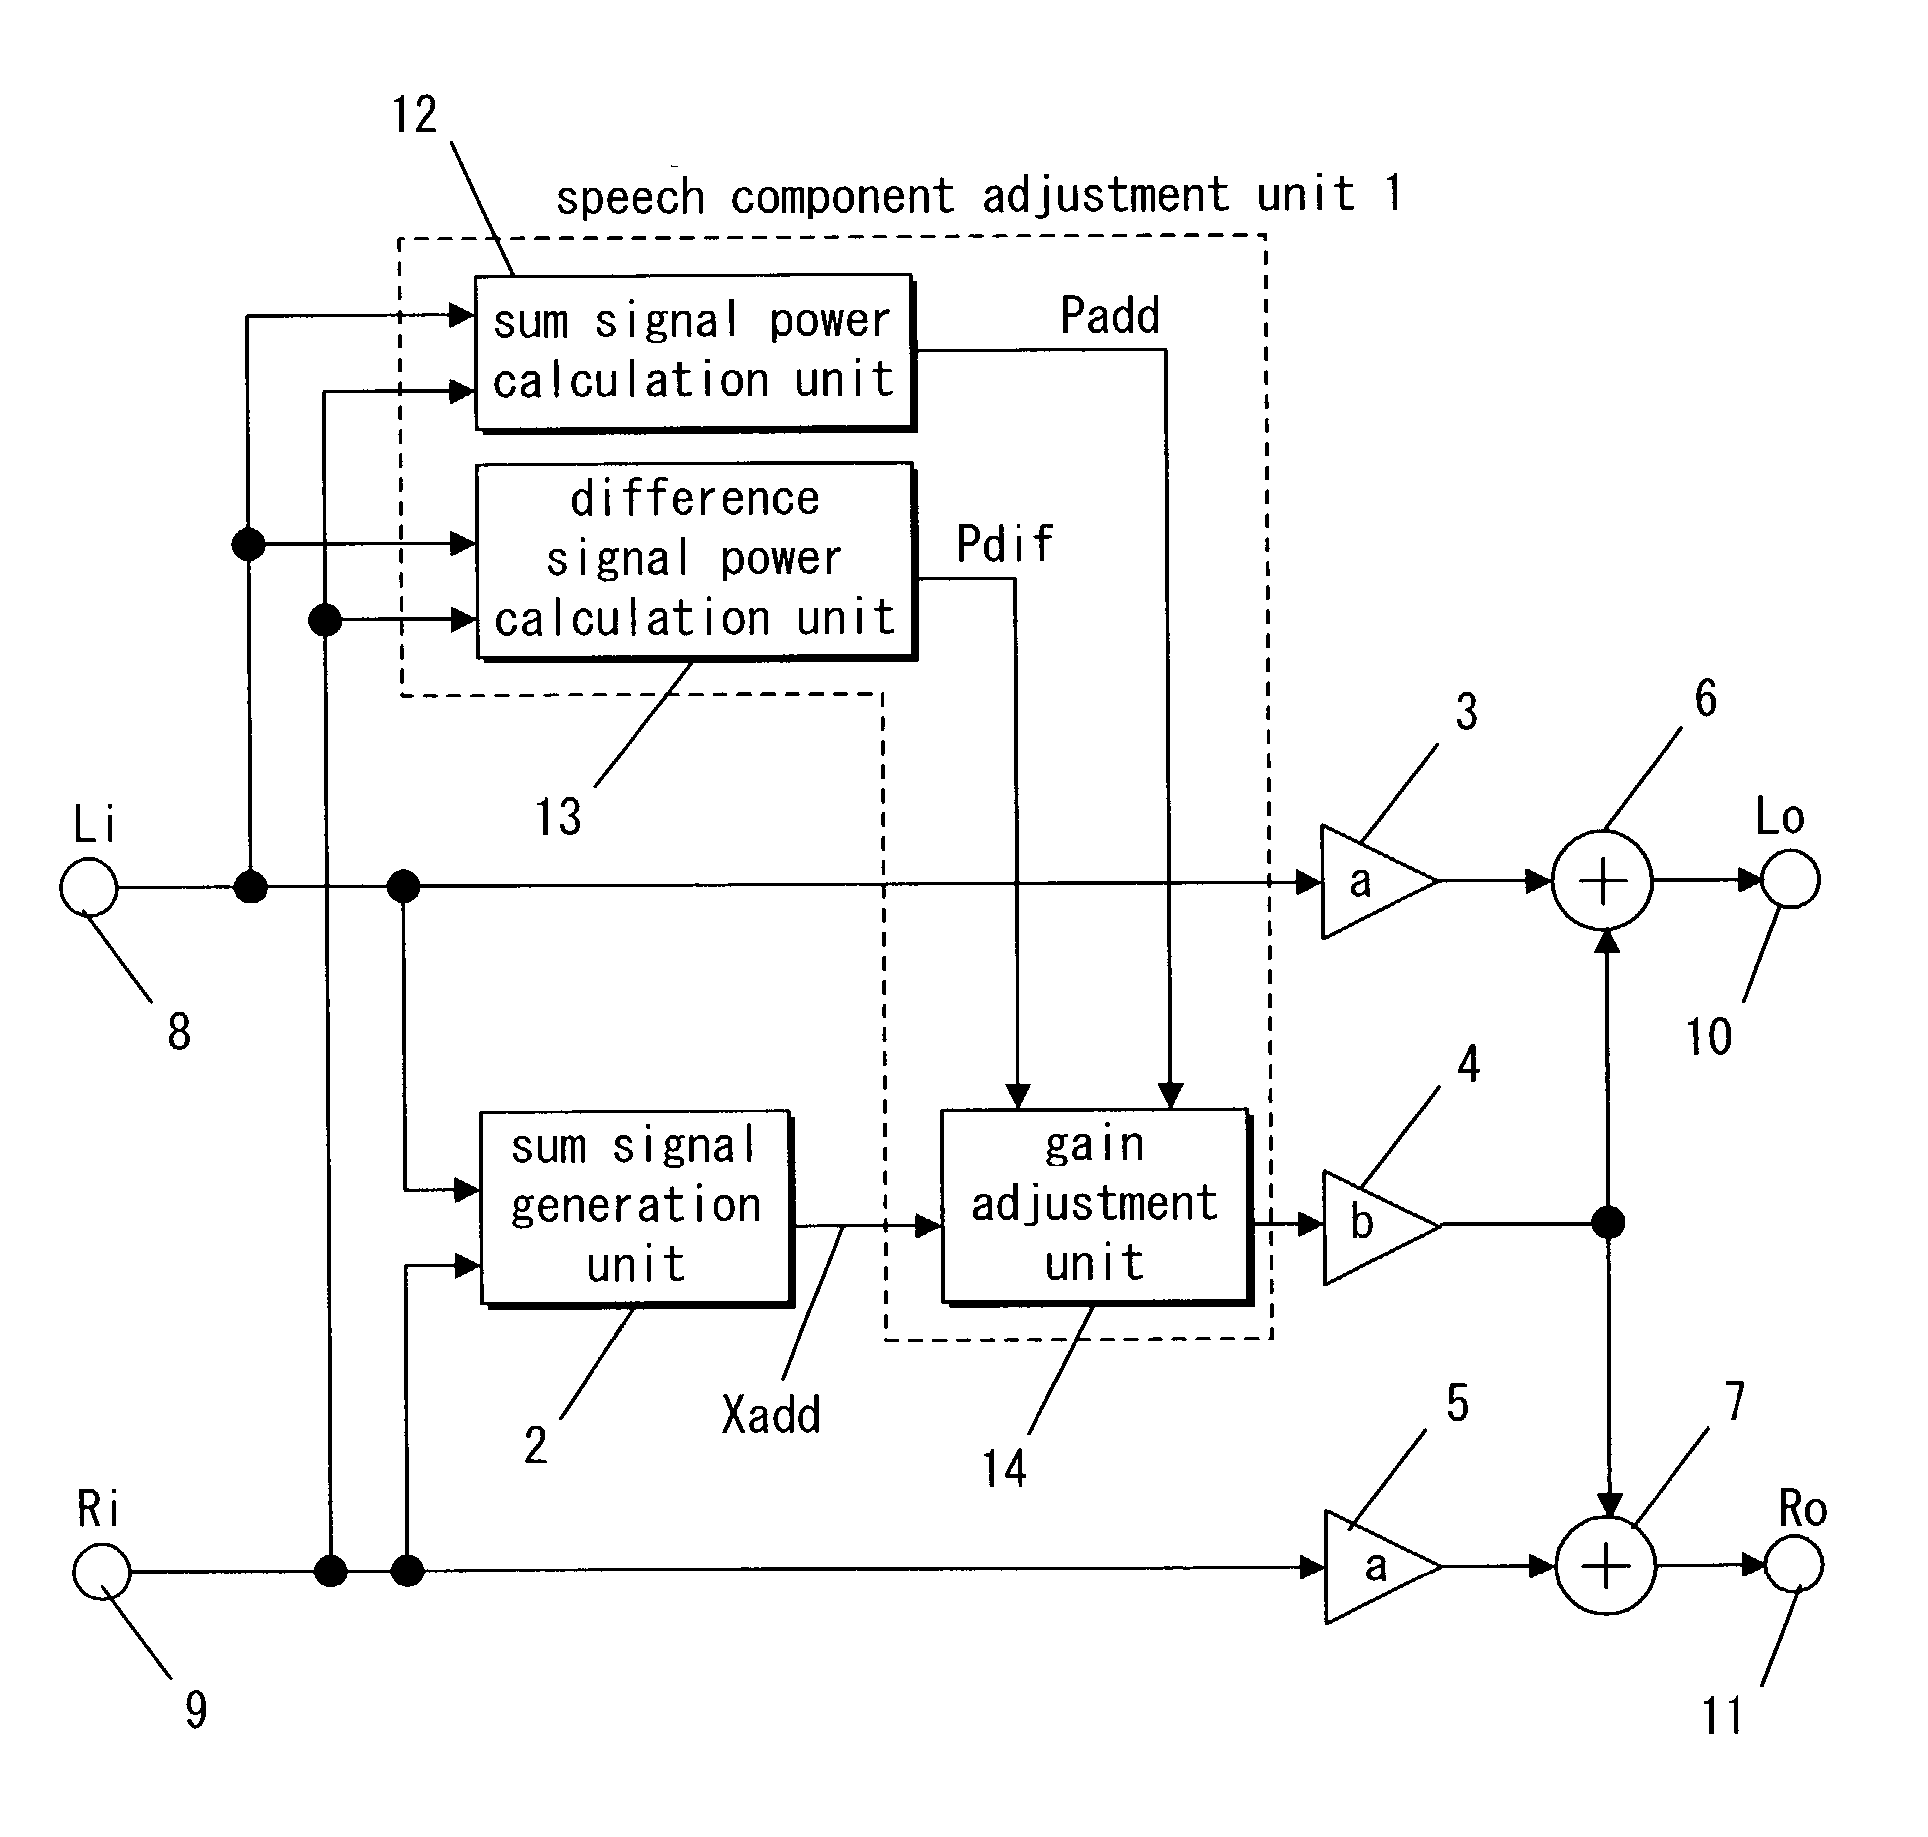 System and method for enhancing speech components of an audio signal